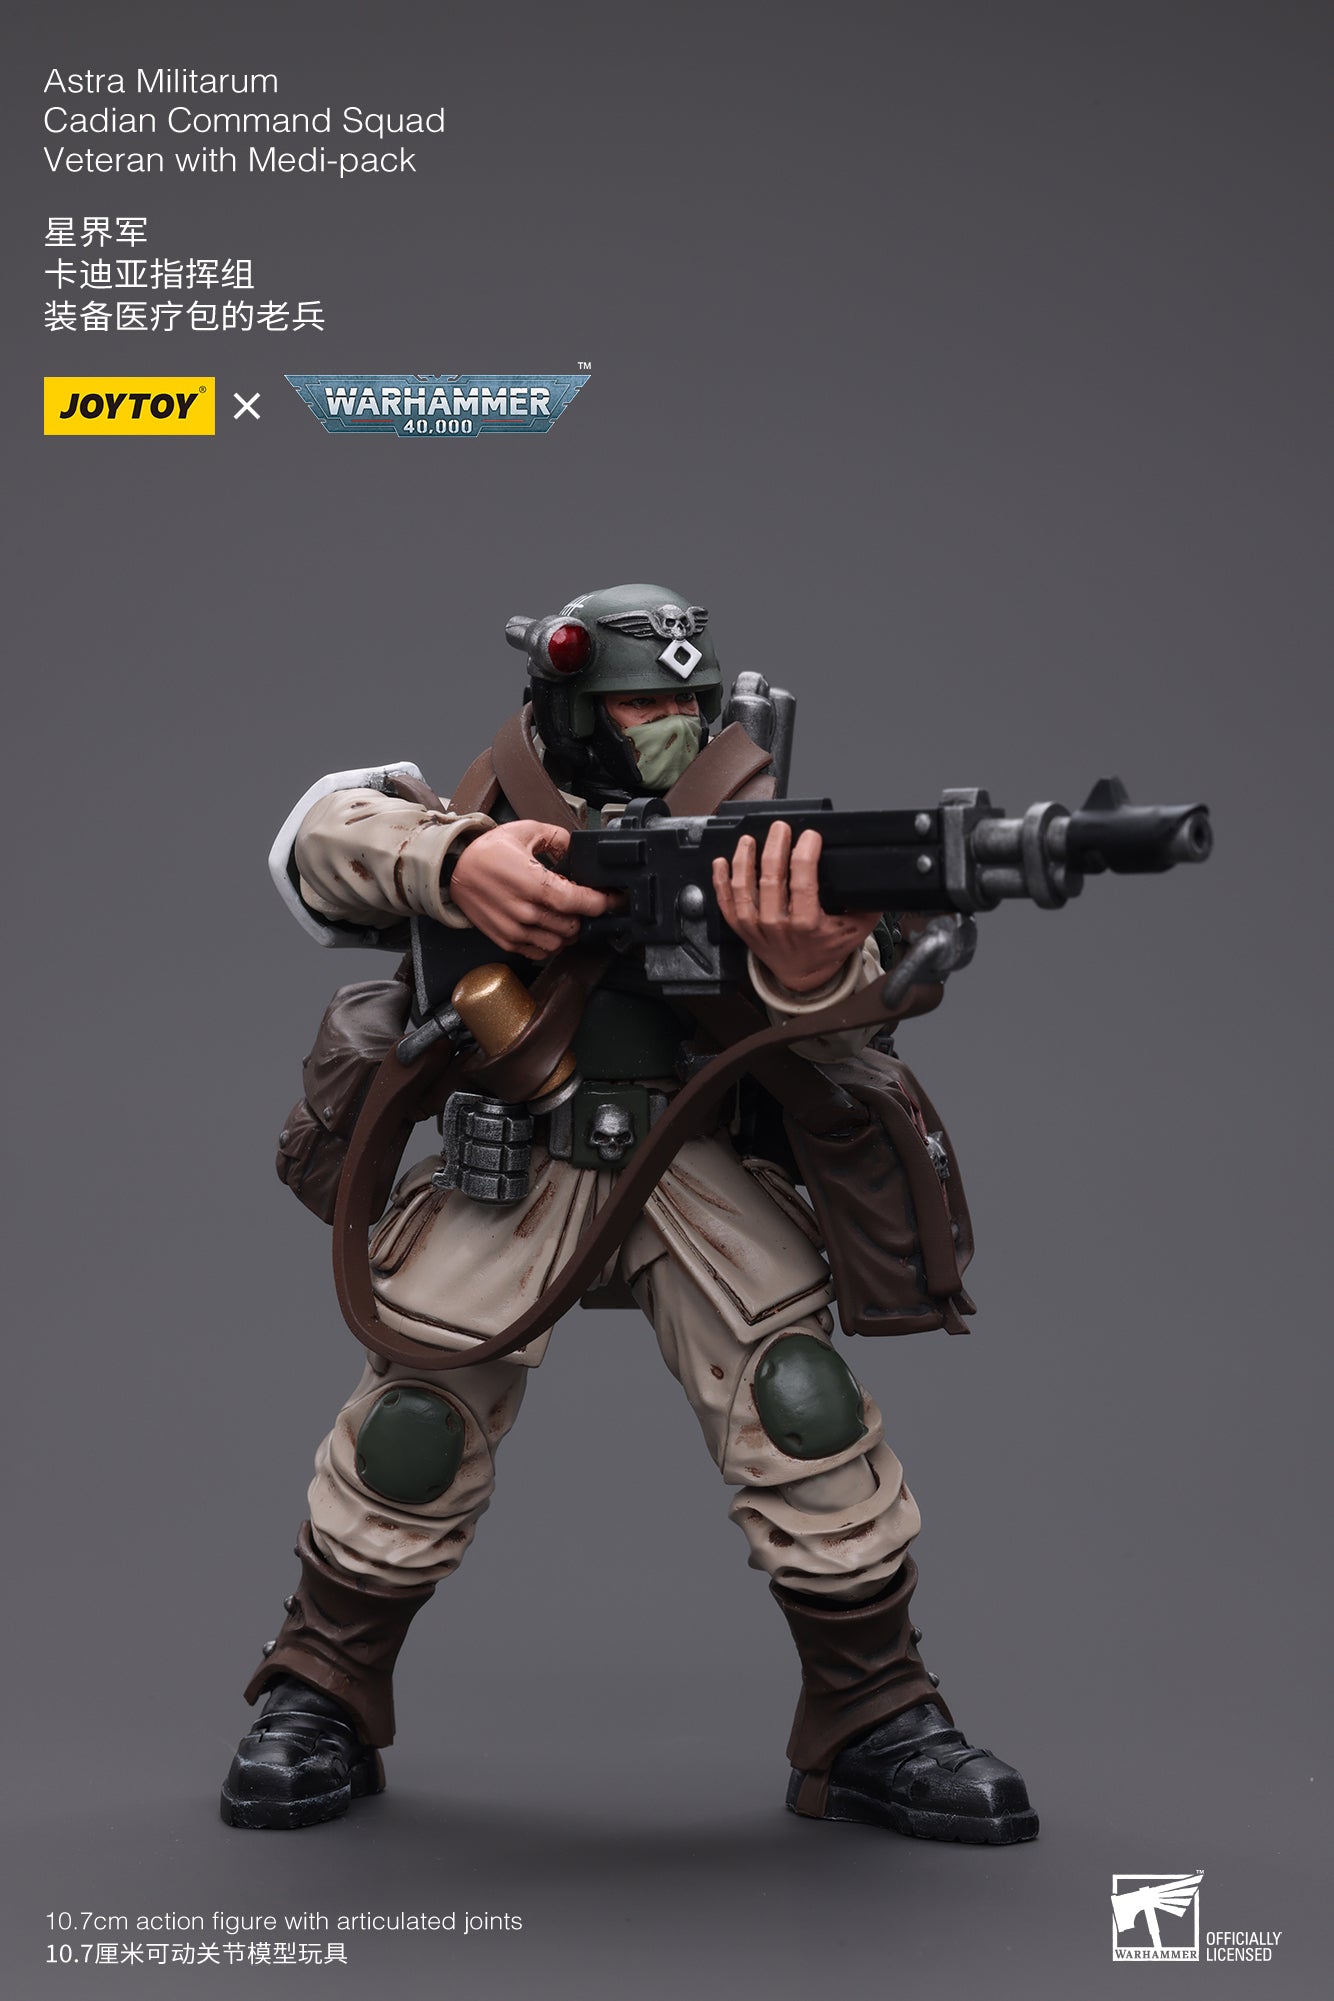 Astra Militarum Cadian Command Squad Veteran with Medi-pack - Warhammer 40K Action Figure By JOYTOY